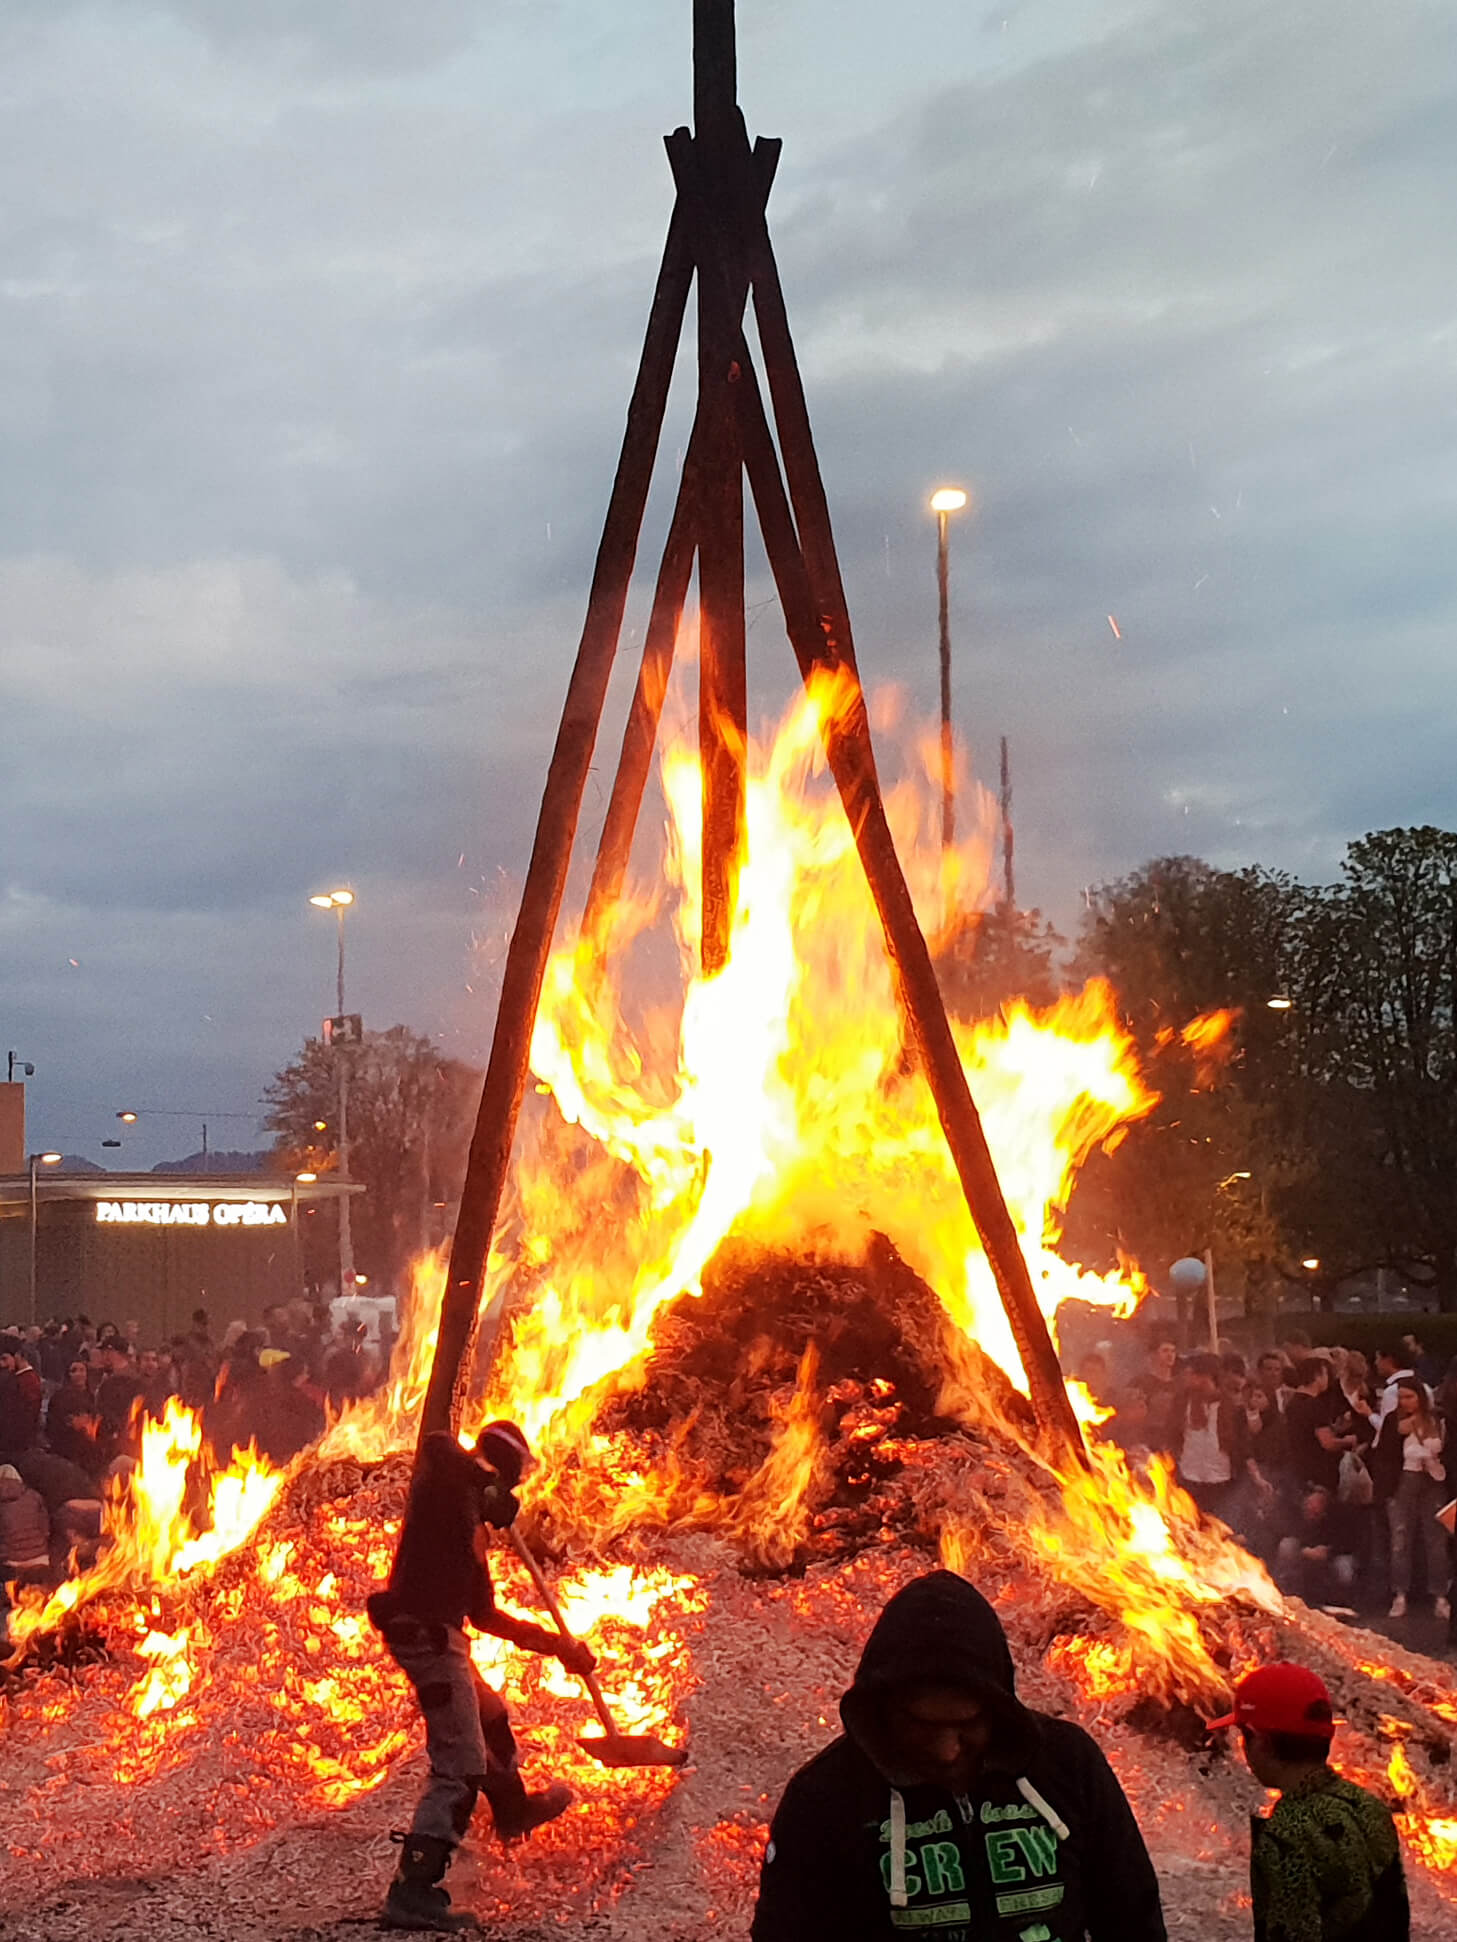 Burning the Böögg in Solothurn (Switzerland) to mark the end of Fasnacht.  Basically a towering inferno packed with fireworks in the middle of the old  town. : r/ali_on_switzerland